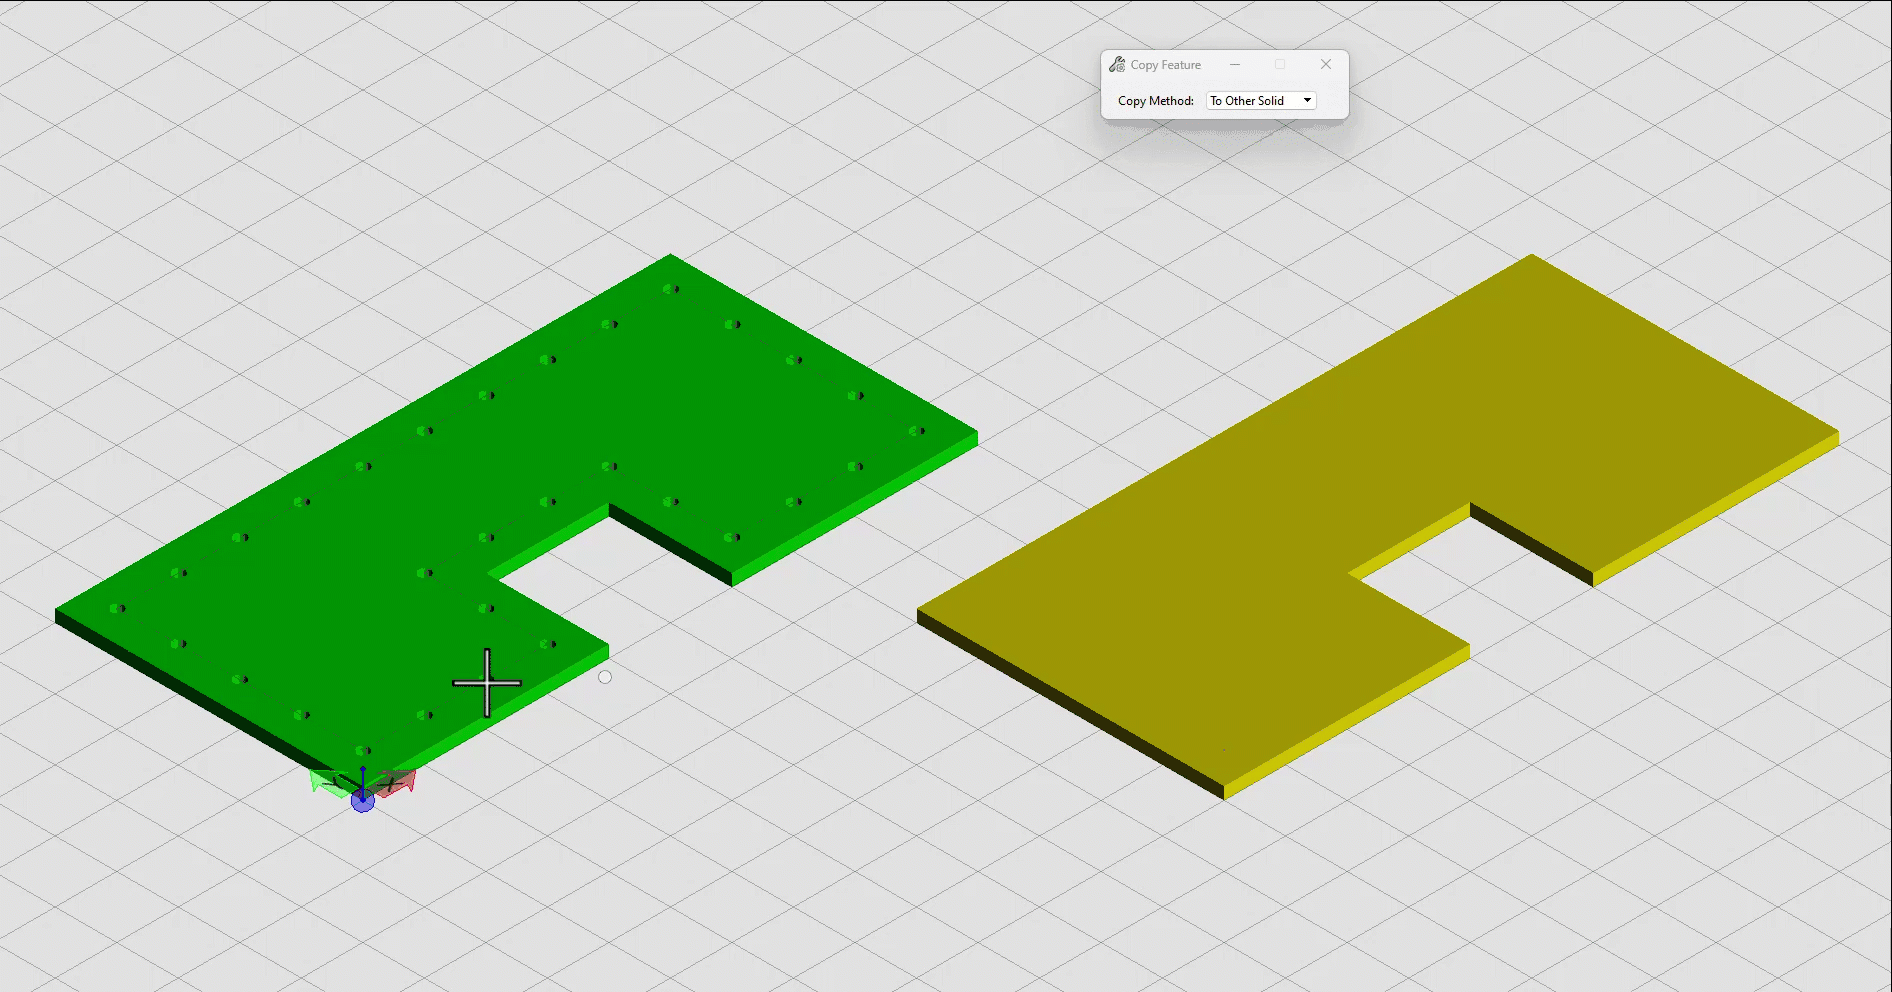 2D/3D model renderings of a similar L-shaped object. Both are displayed on a grid background, ideal for MicroStation users proficient in 2D/3D Modeling.